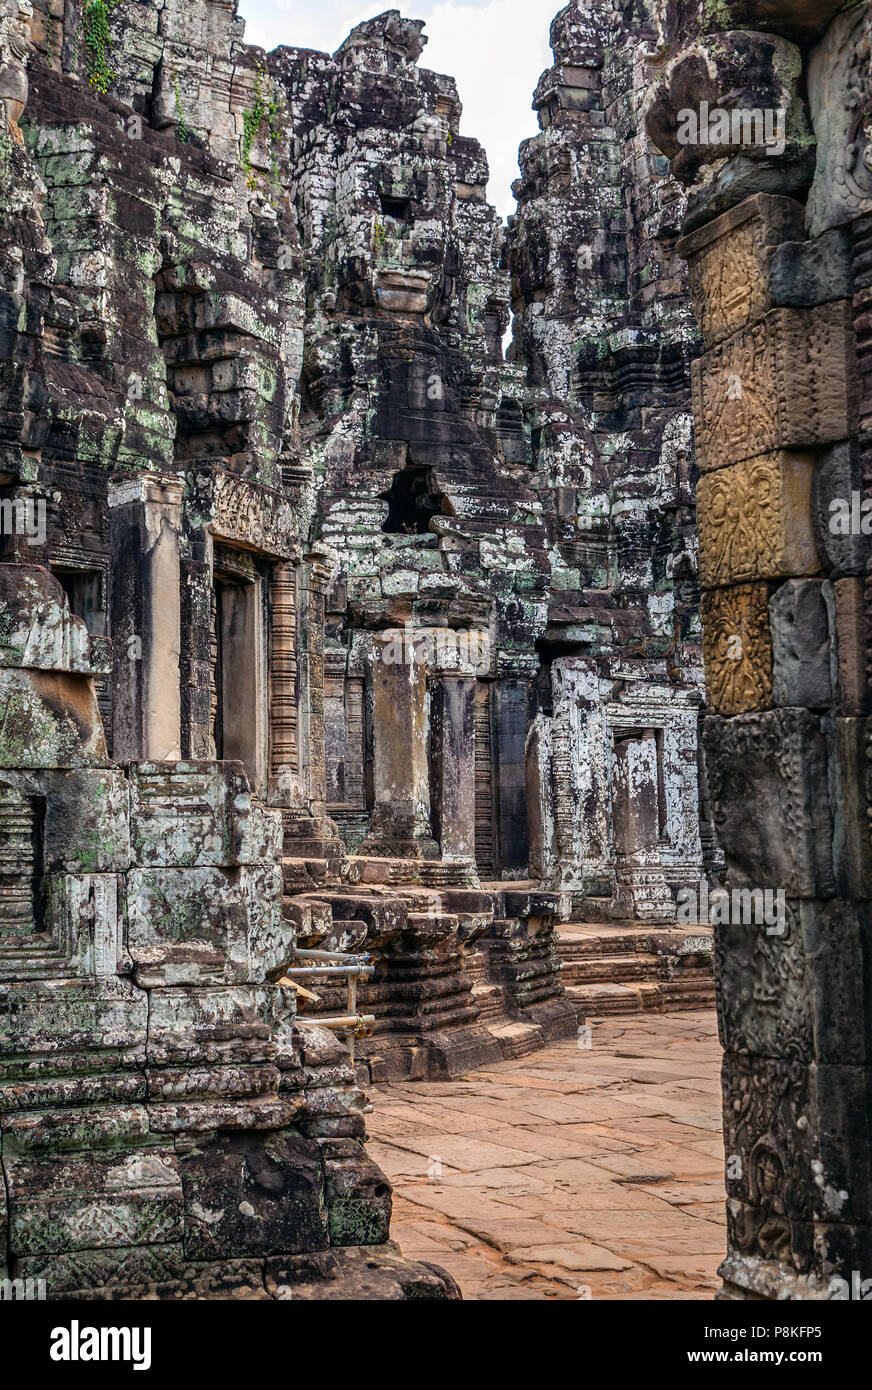 The famous Khmer temple of Angkor Tom in Cambodia. Stock Photo